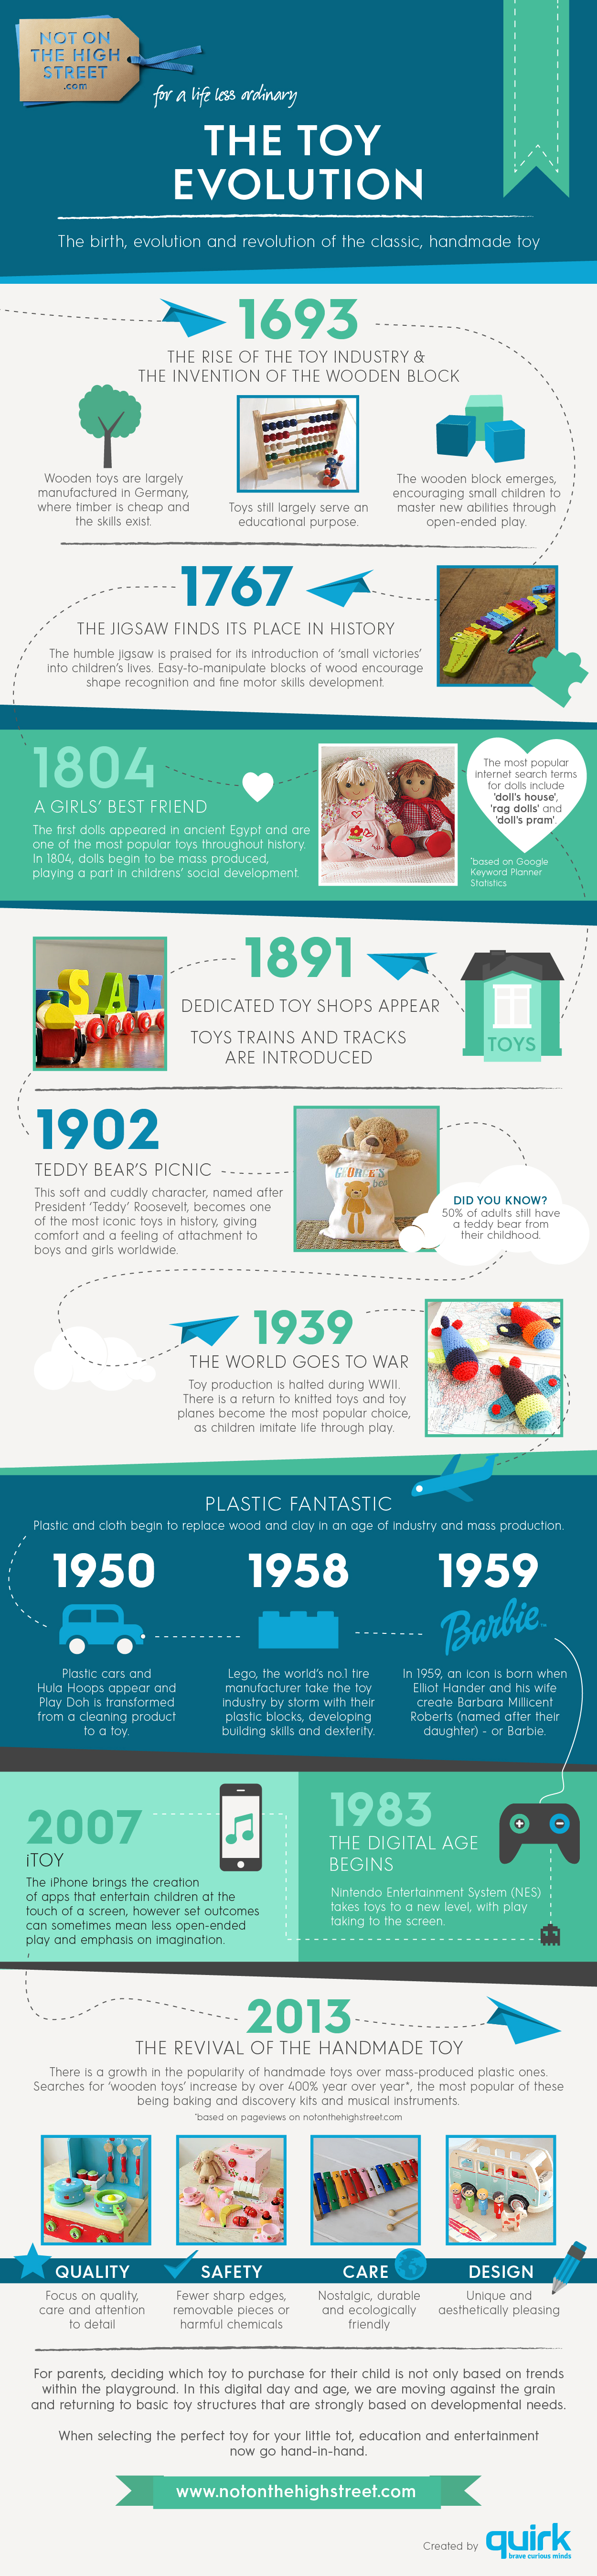 Infographic: Toy fashions over the centuries - Dad Blog UK